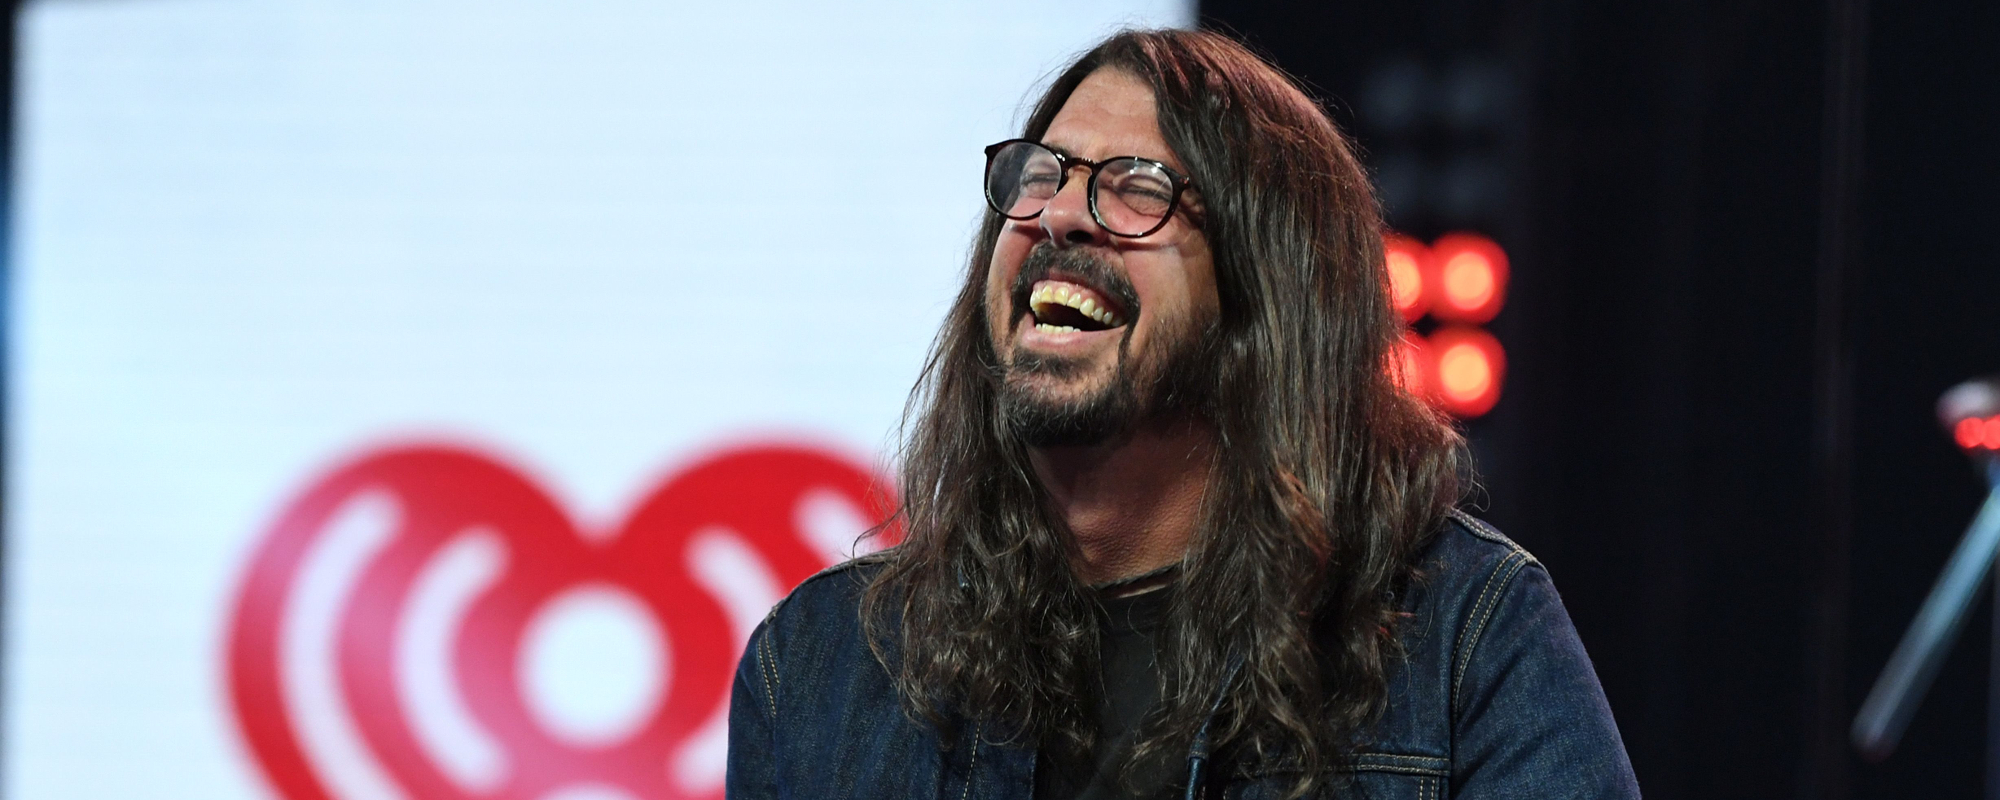 For His Annual Hanukkah Covers Series, Dave Grohl Shares Rendition of the Ramones’ “Blitzkrieg Bop”